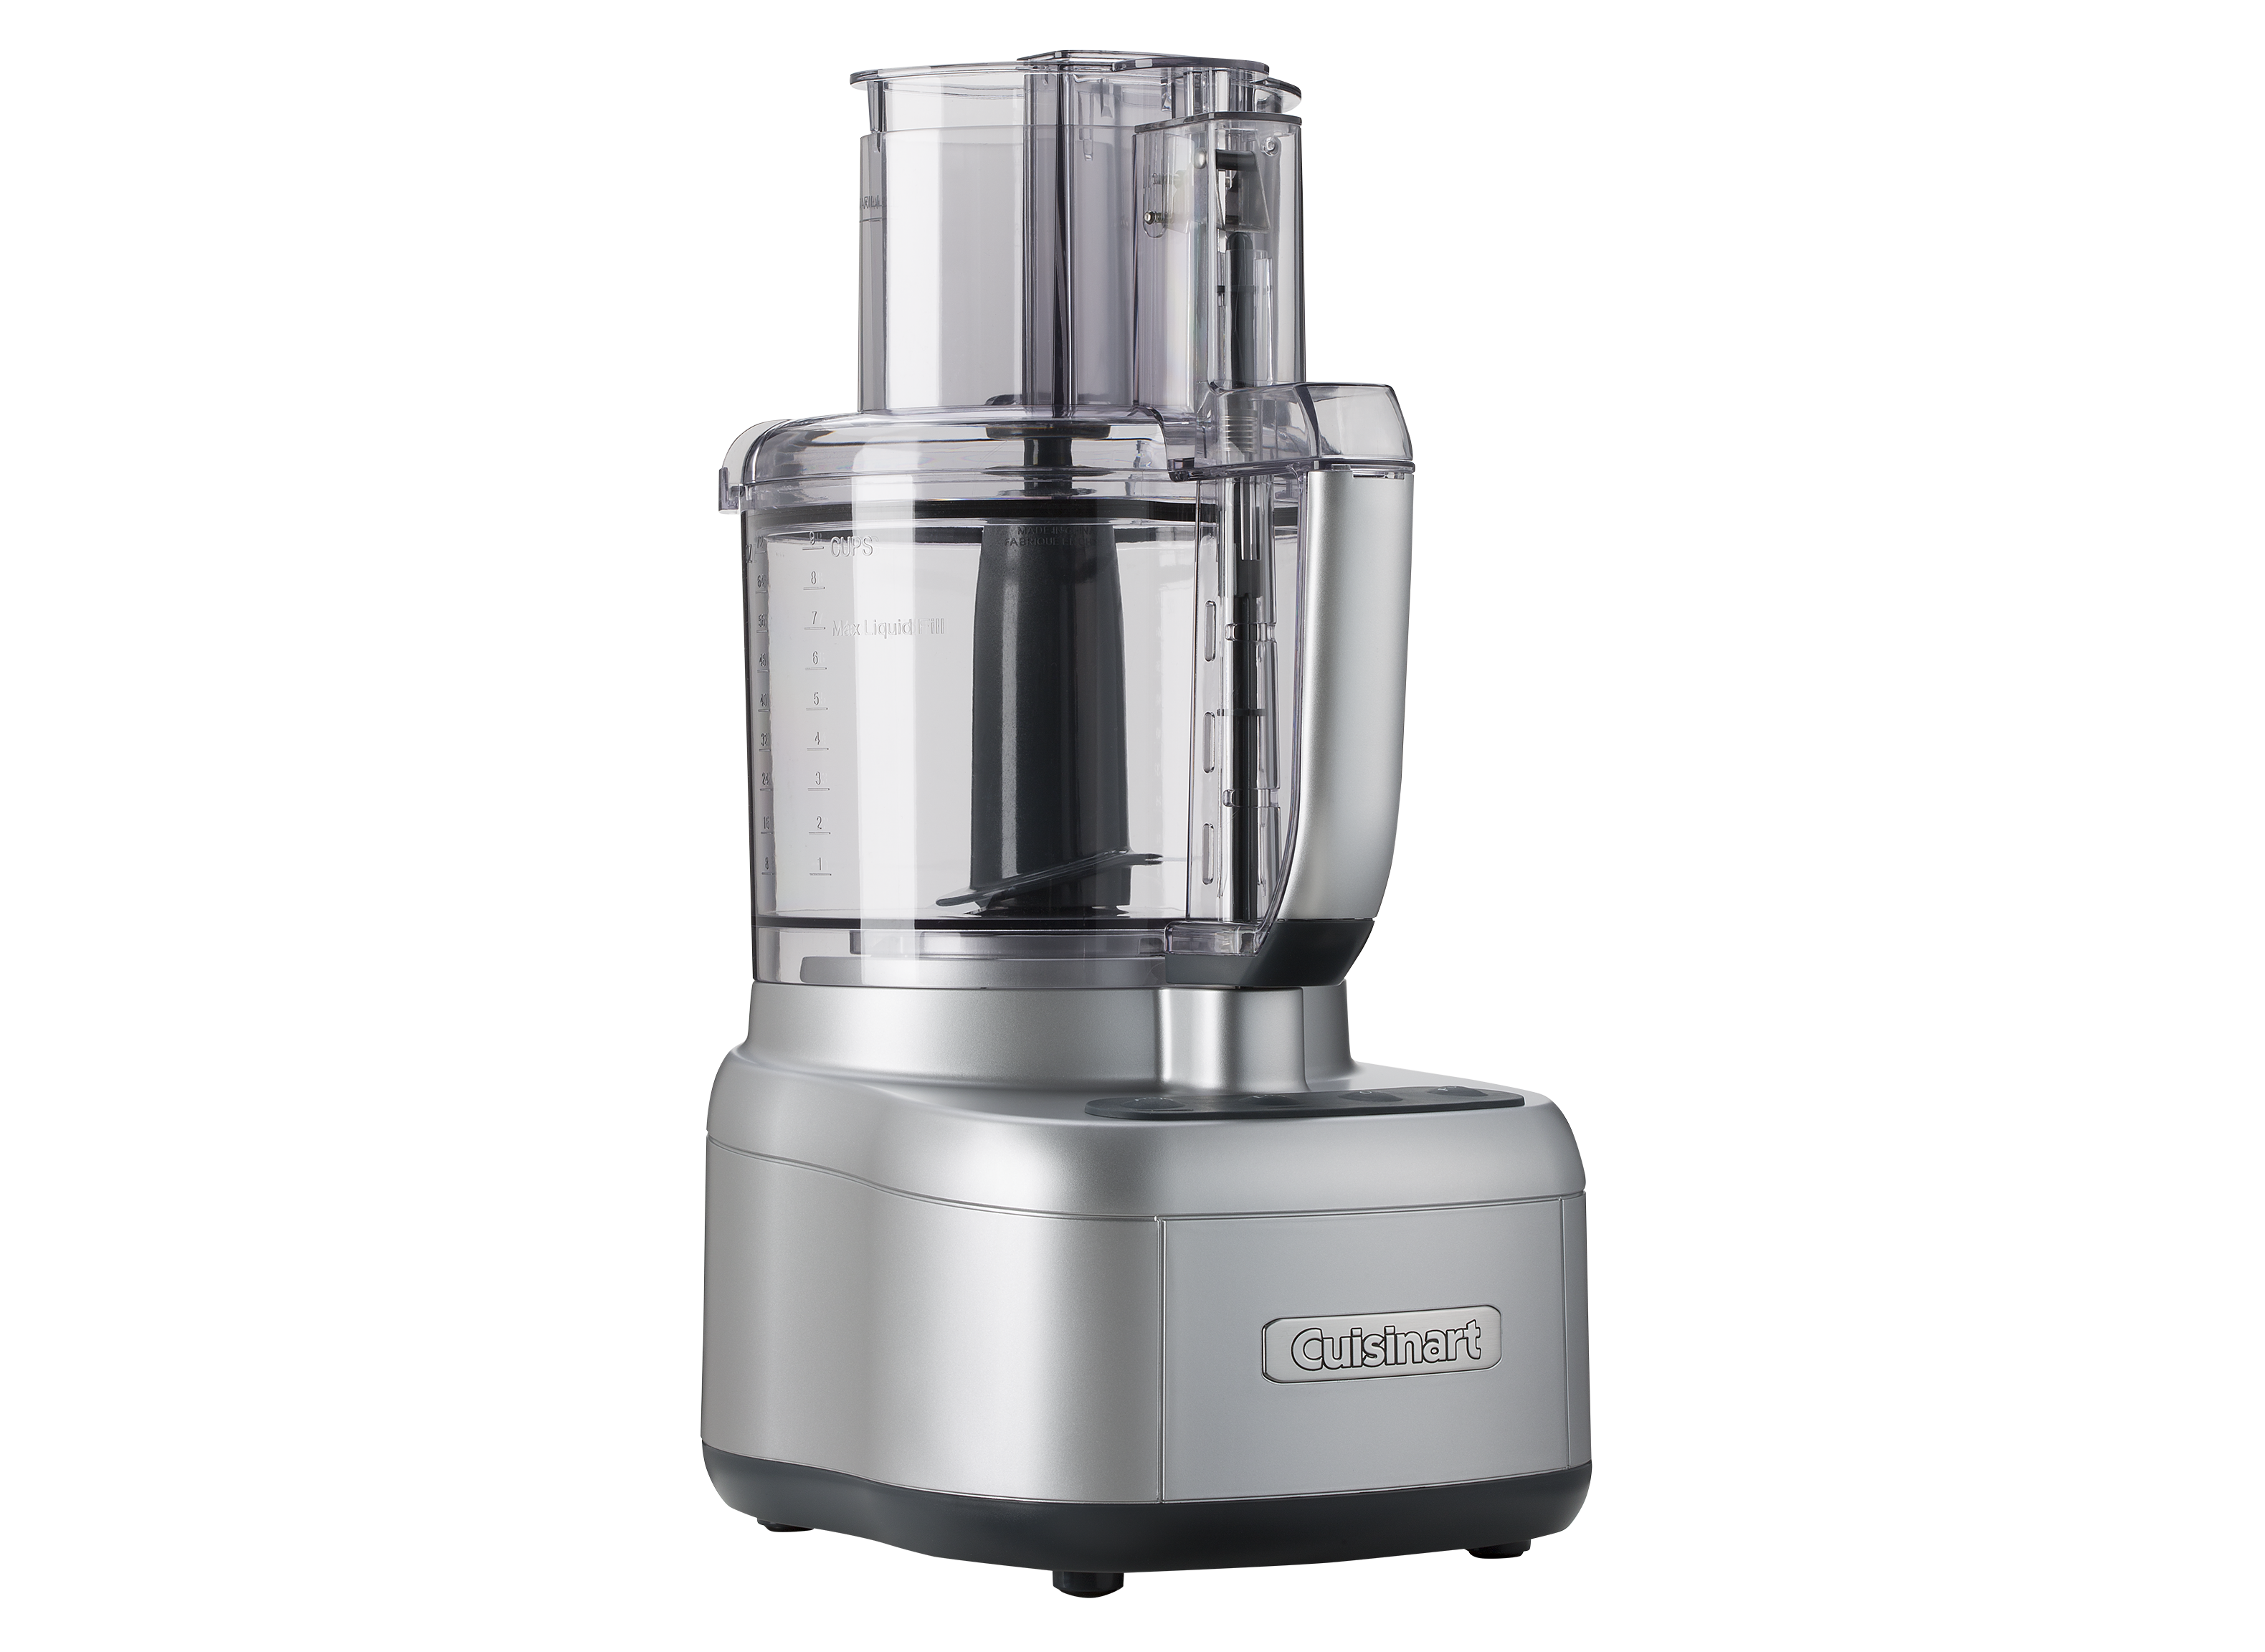 https://crdms.images.consumerreports.org/prod/products/cr/models/379153-foodprocessors-cuisinart-elemental11fp11gm.png